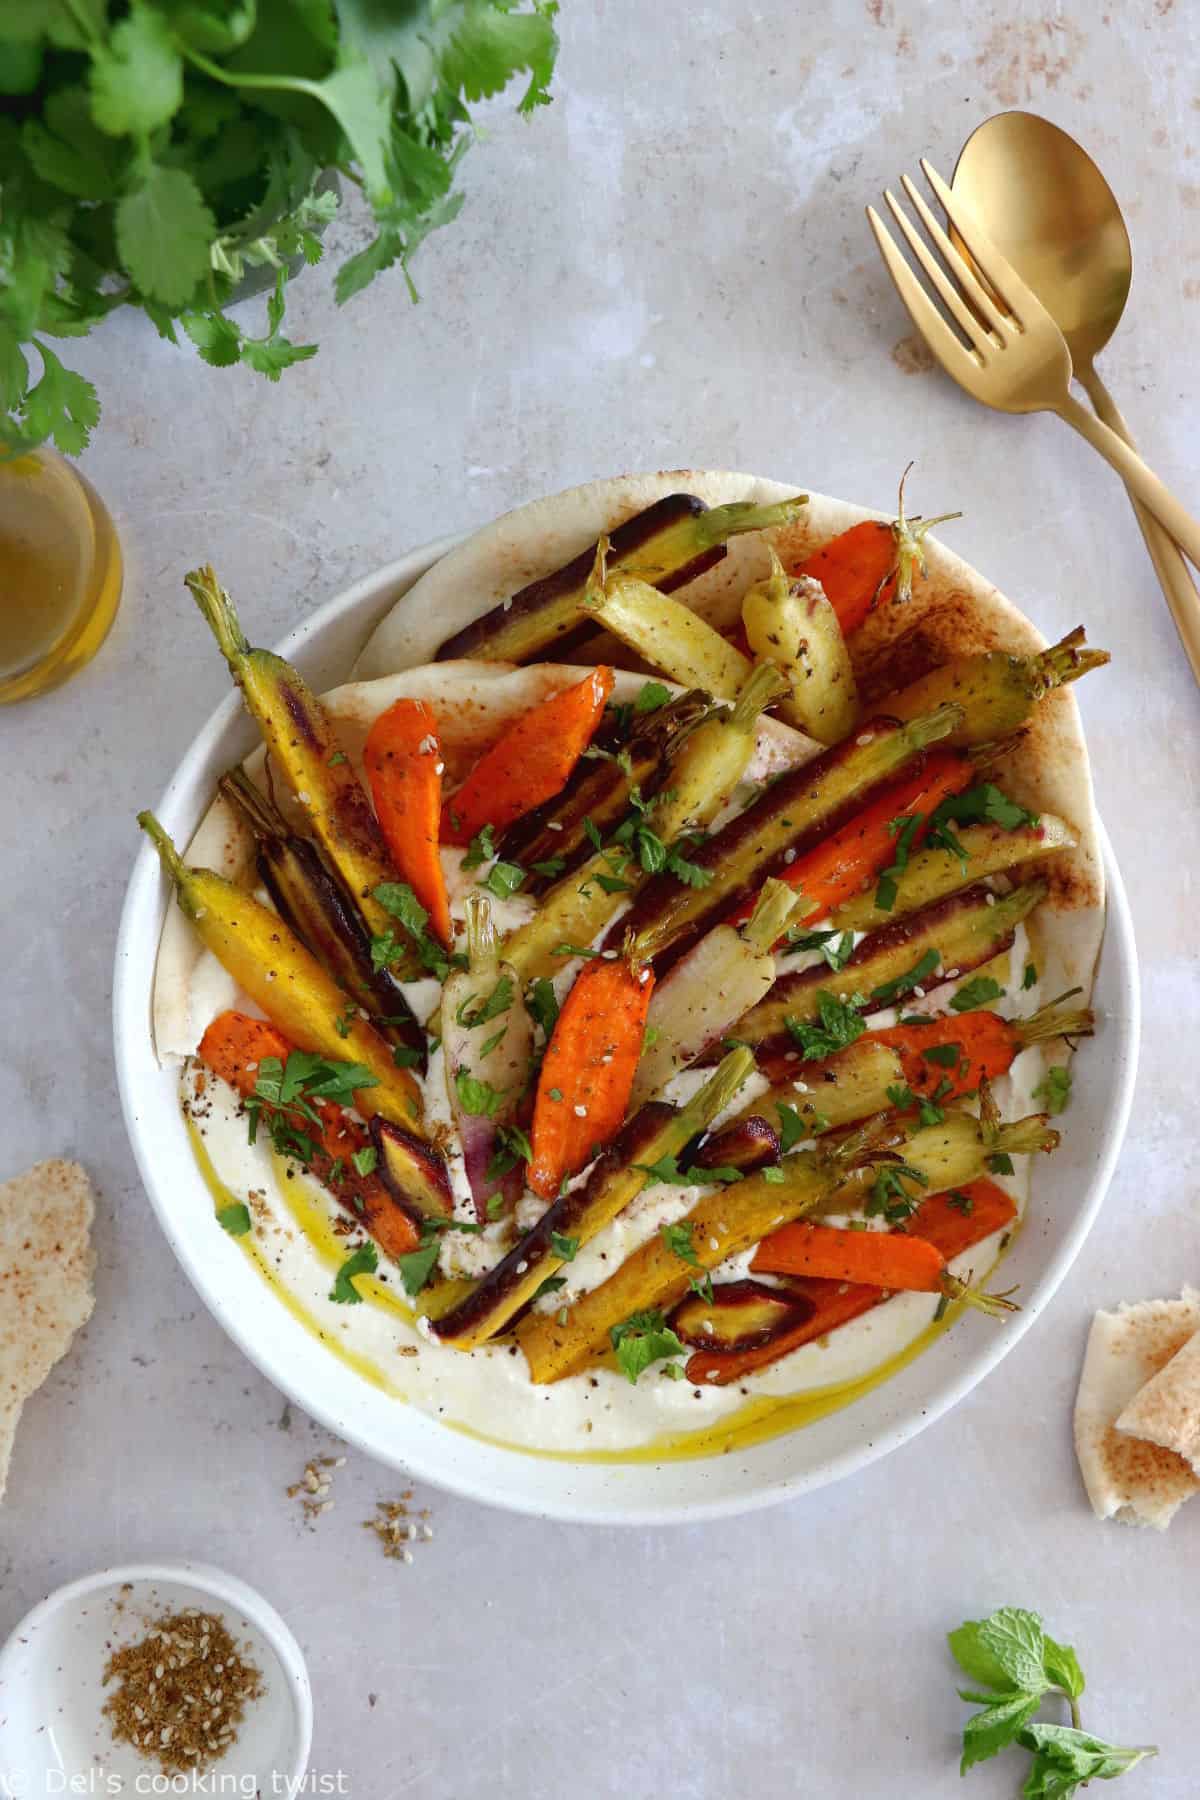 Za'atar roasted carrots with whipped feta is a ridiculously simple recipe combining roasted veggies and a creamy cheese dip.